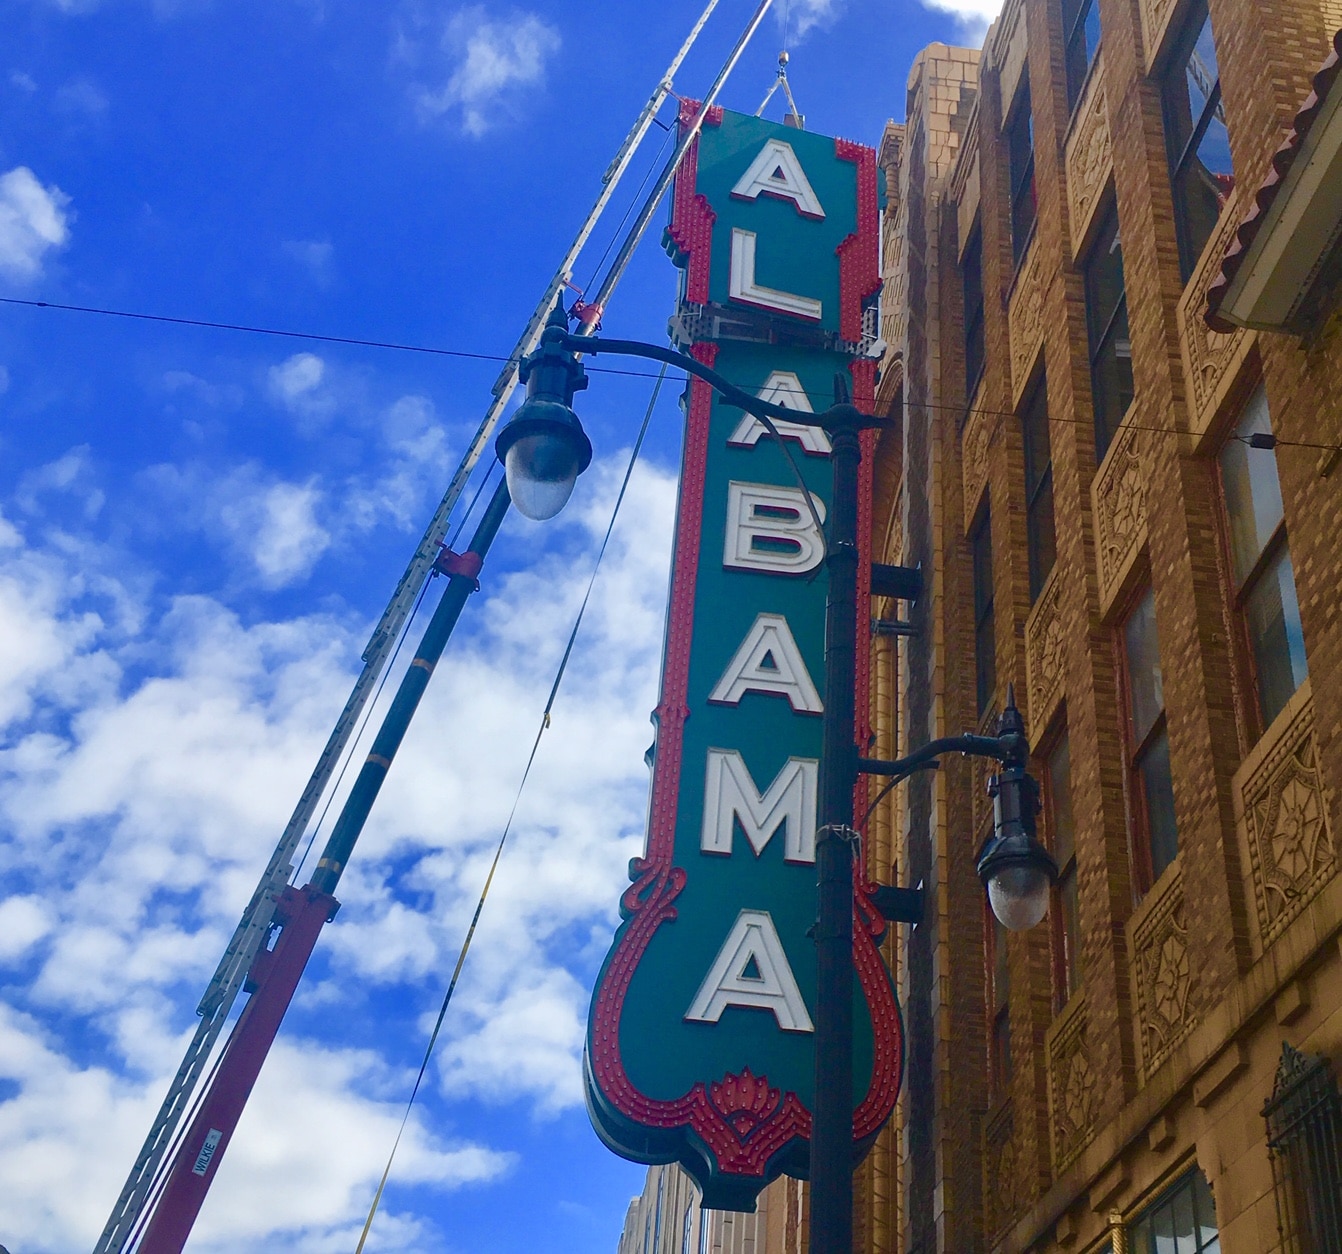 IMG 0528 Birmingham’s iconic ALABAMA Theatre sign is back! Exclusive video of the A and L lifted into place